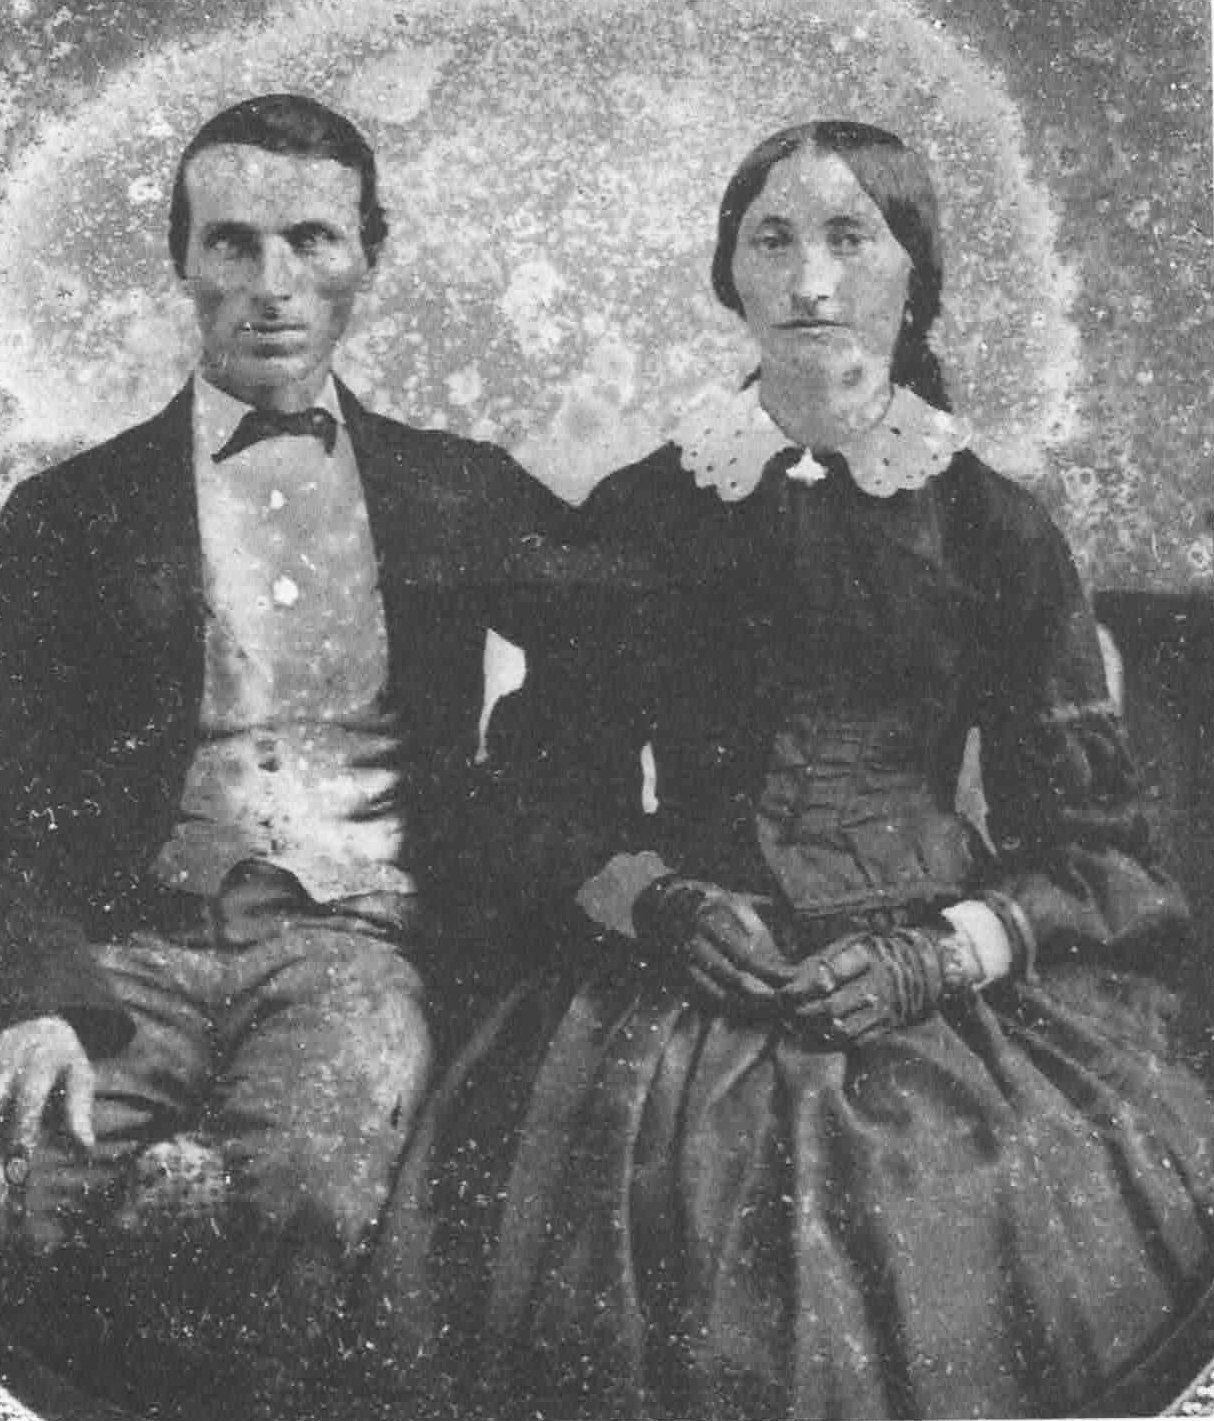 The First Caretakers, Peter & Elizabeth Thorn (Adams County Historical Society)